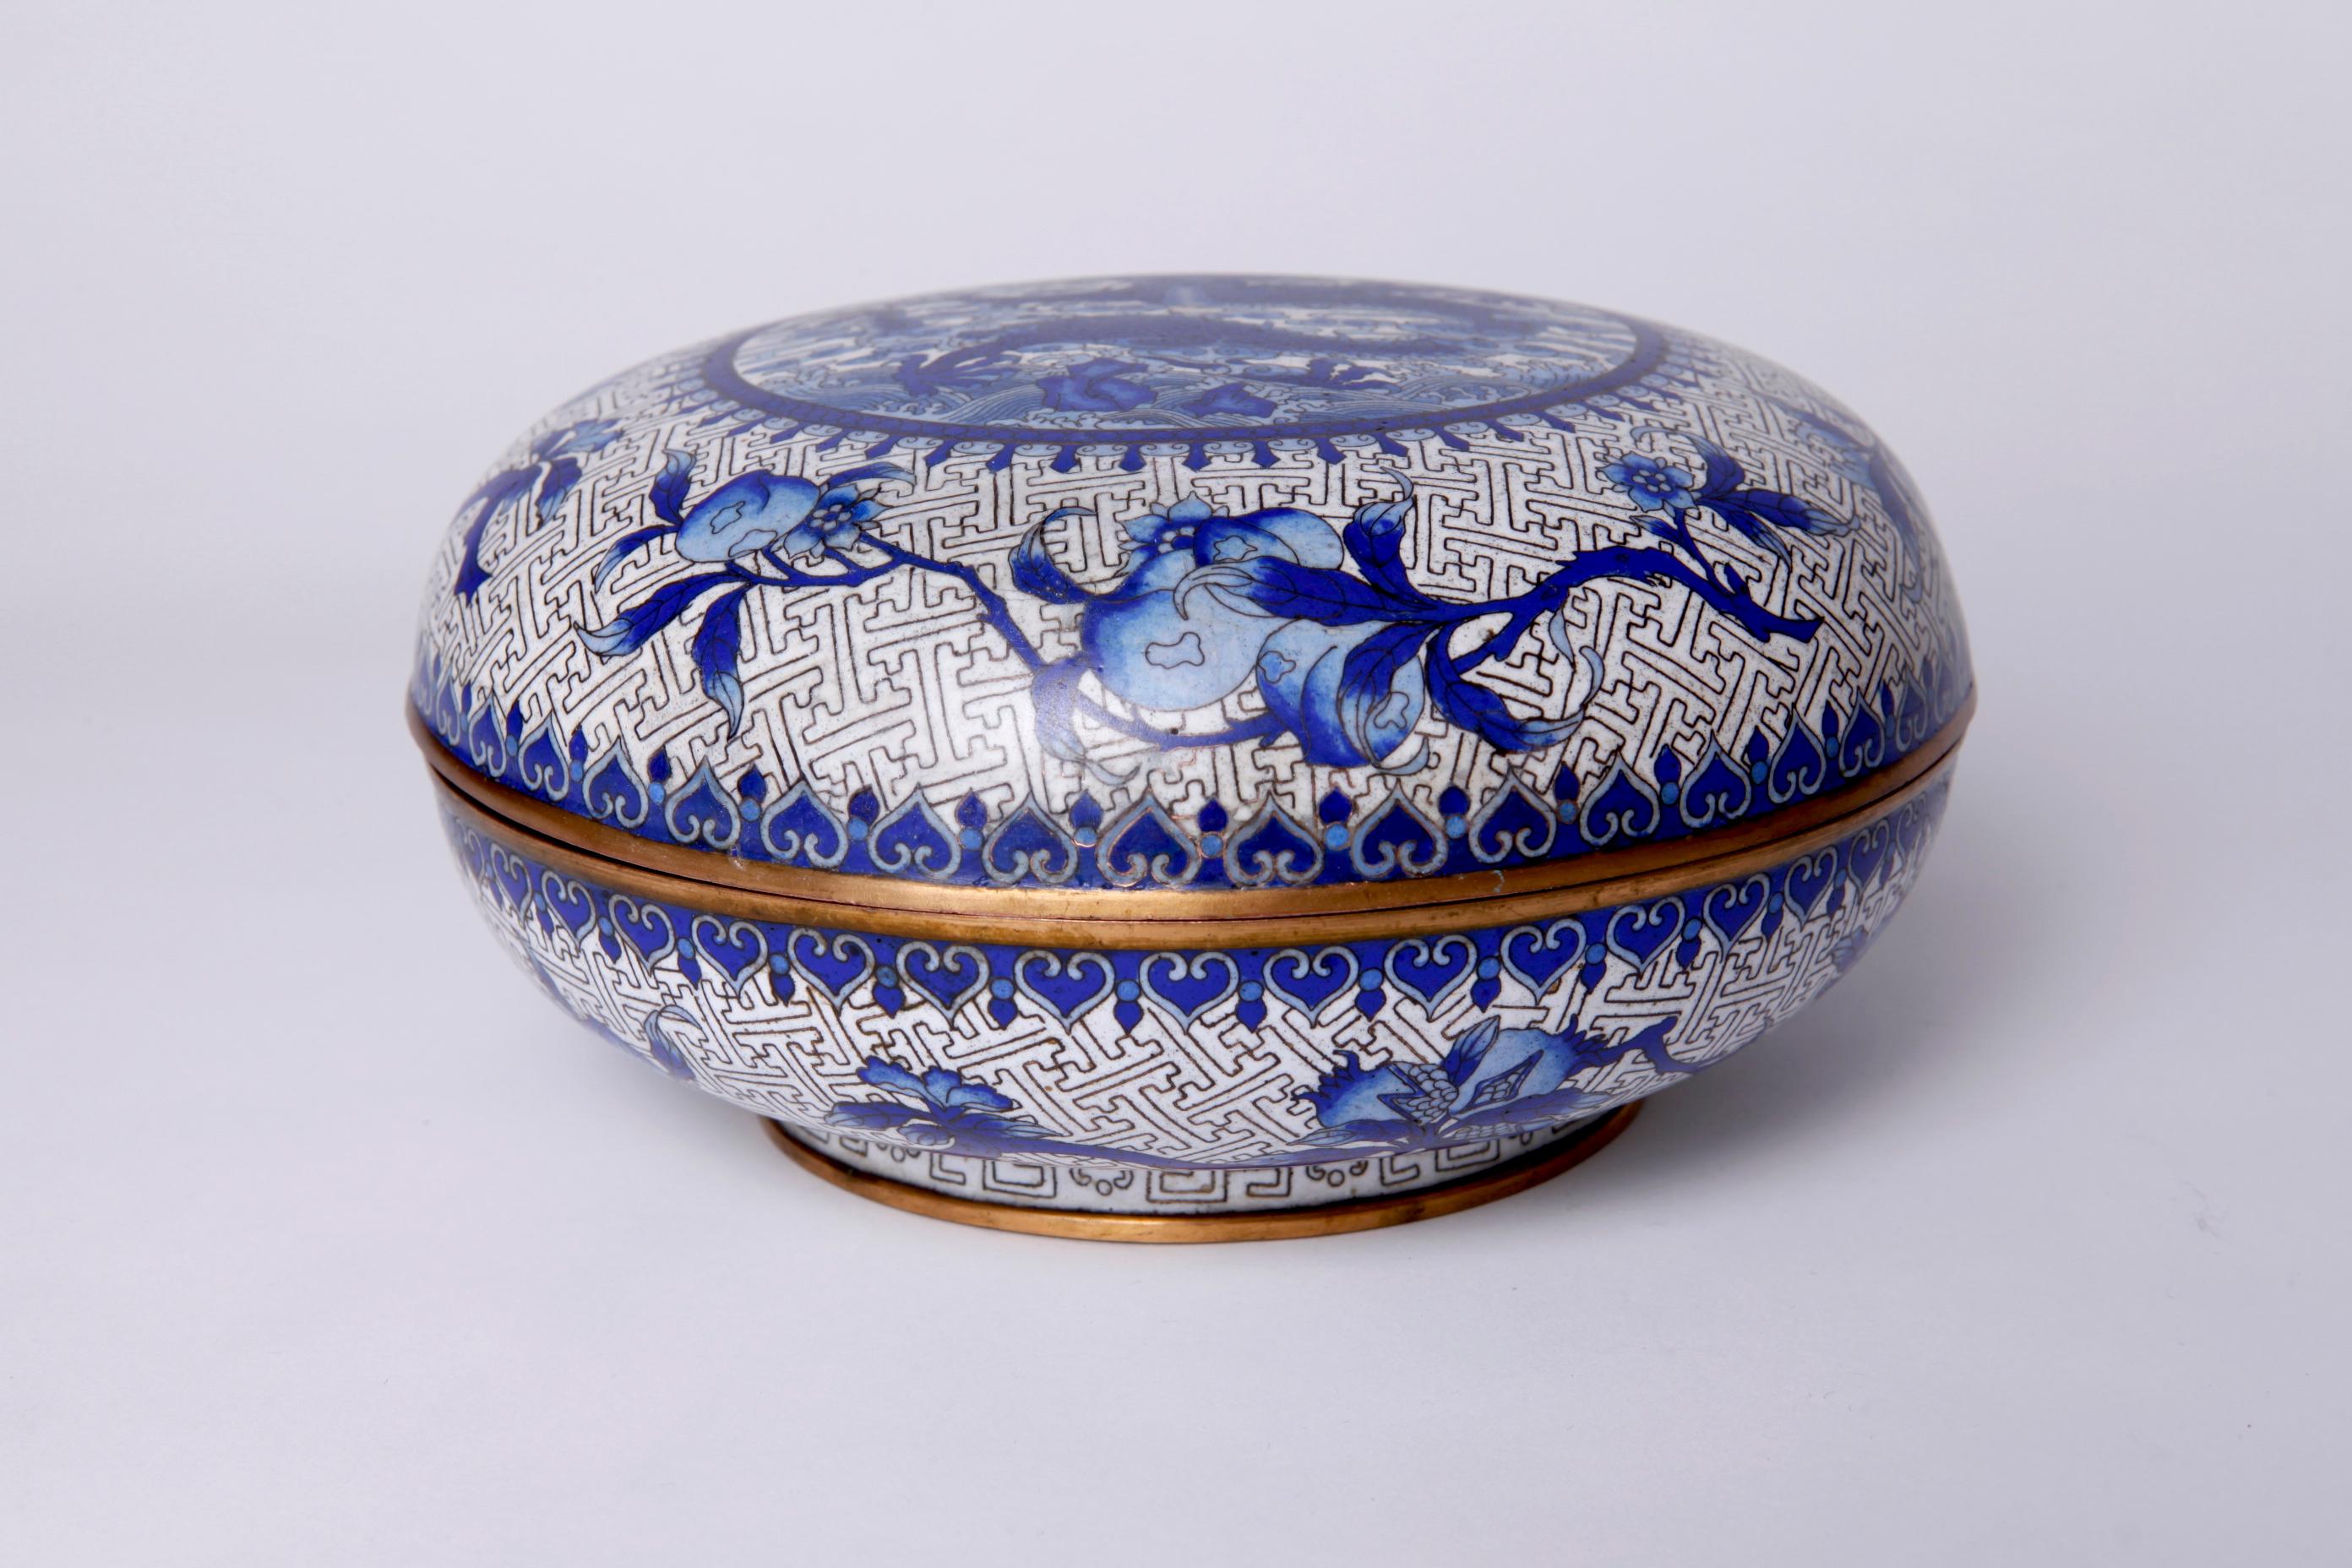 Chinese Cloisonne Box
Round enamel box with lid in a blue and white pattern.
Circa, early 20th century
Measures: H 5 in. (12.7 cm)

NMA No. 2084